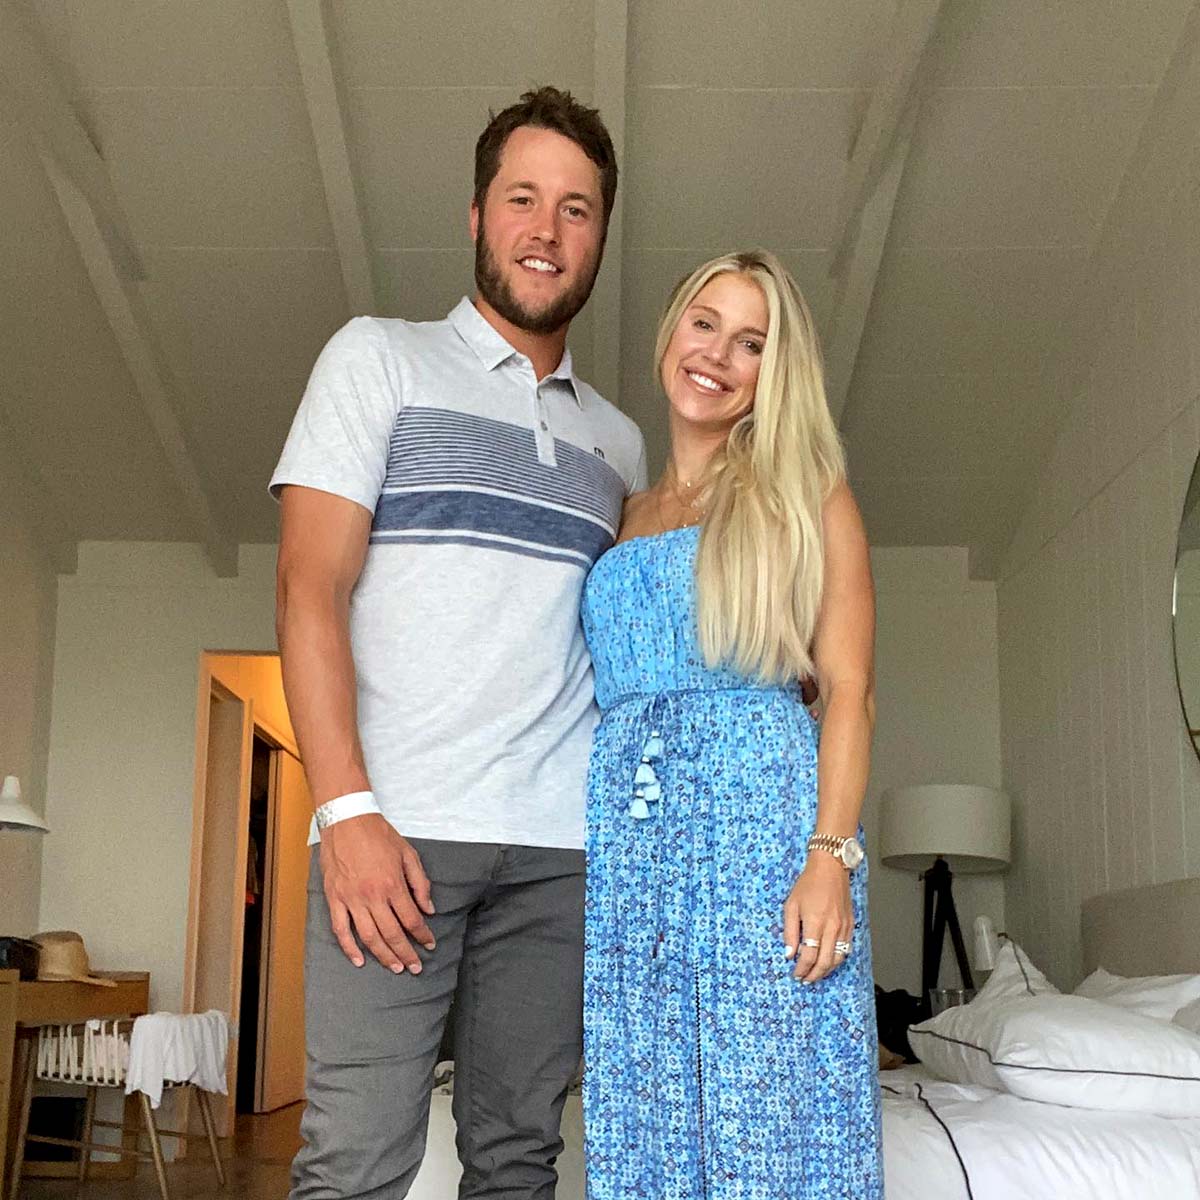 Matthew Stafford's Wife Kelly Hall: Job, How They Met, More